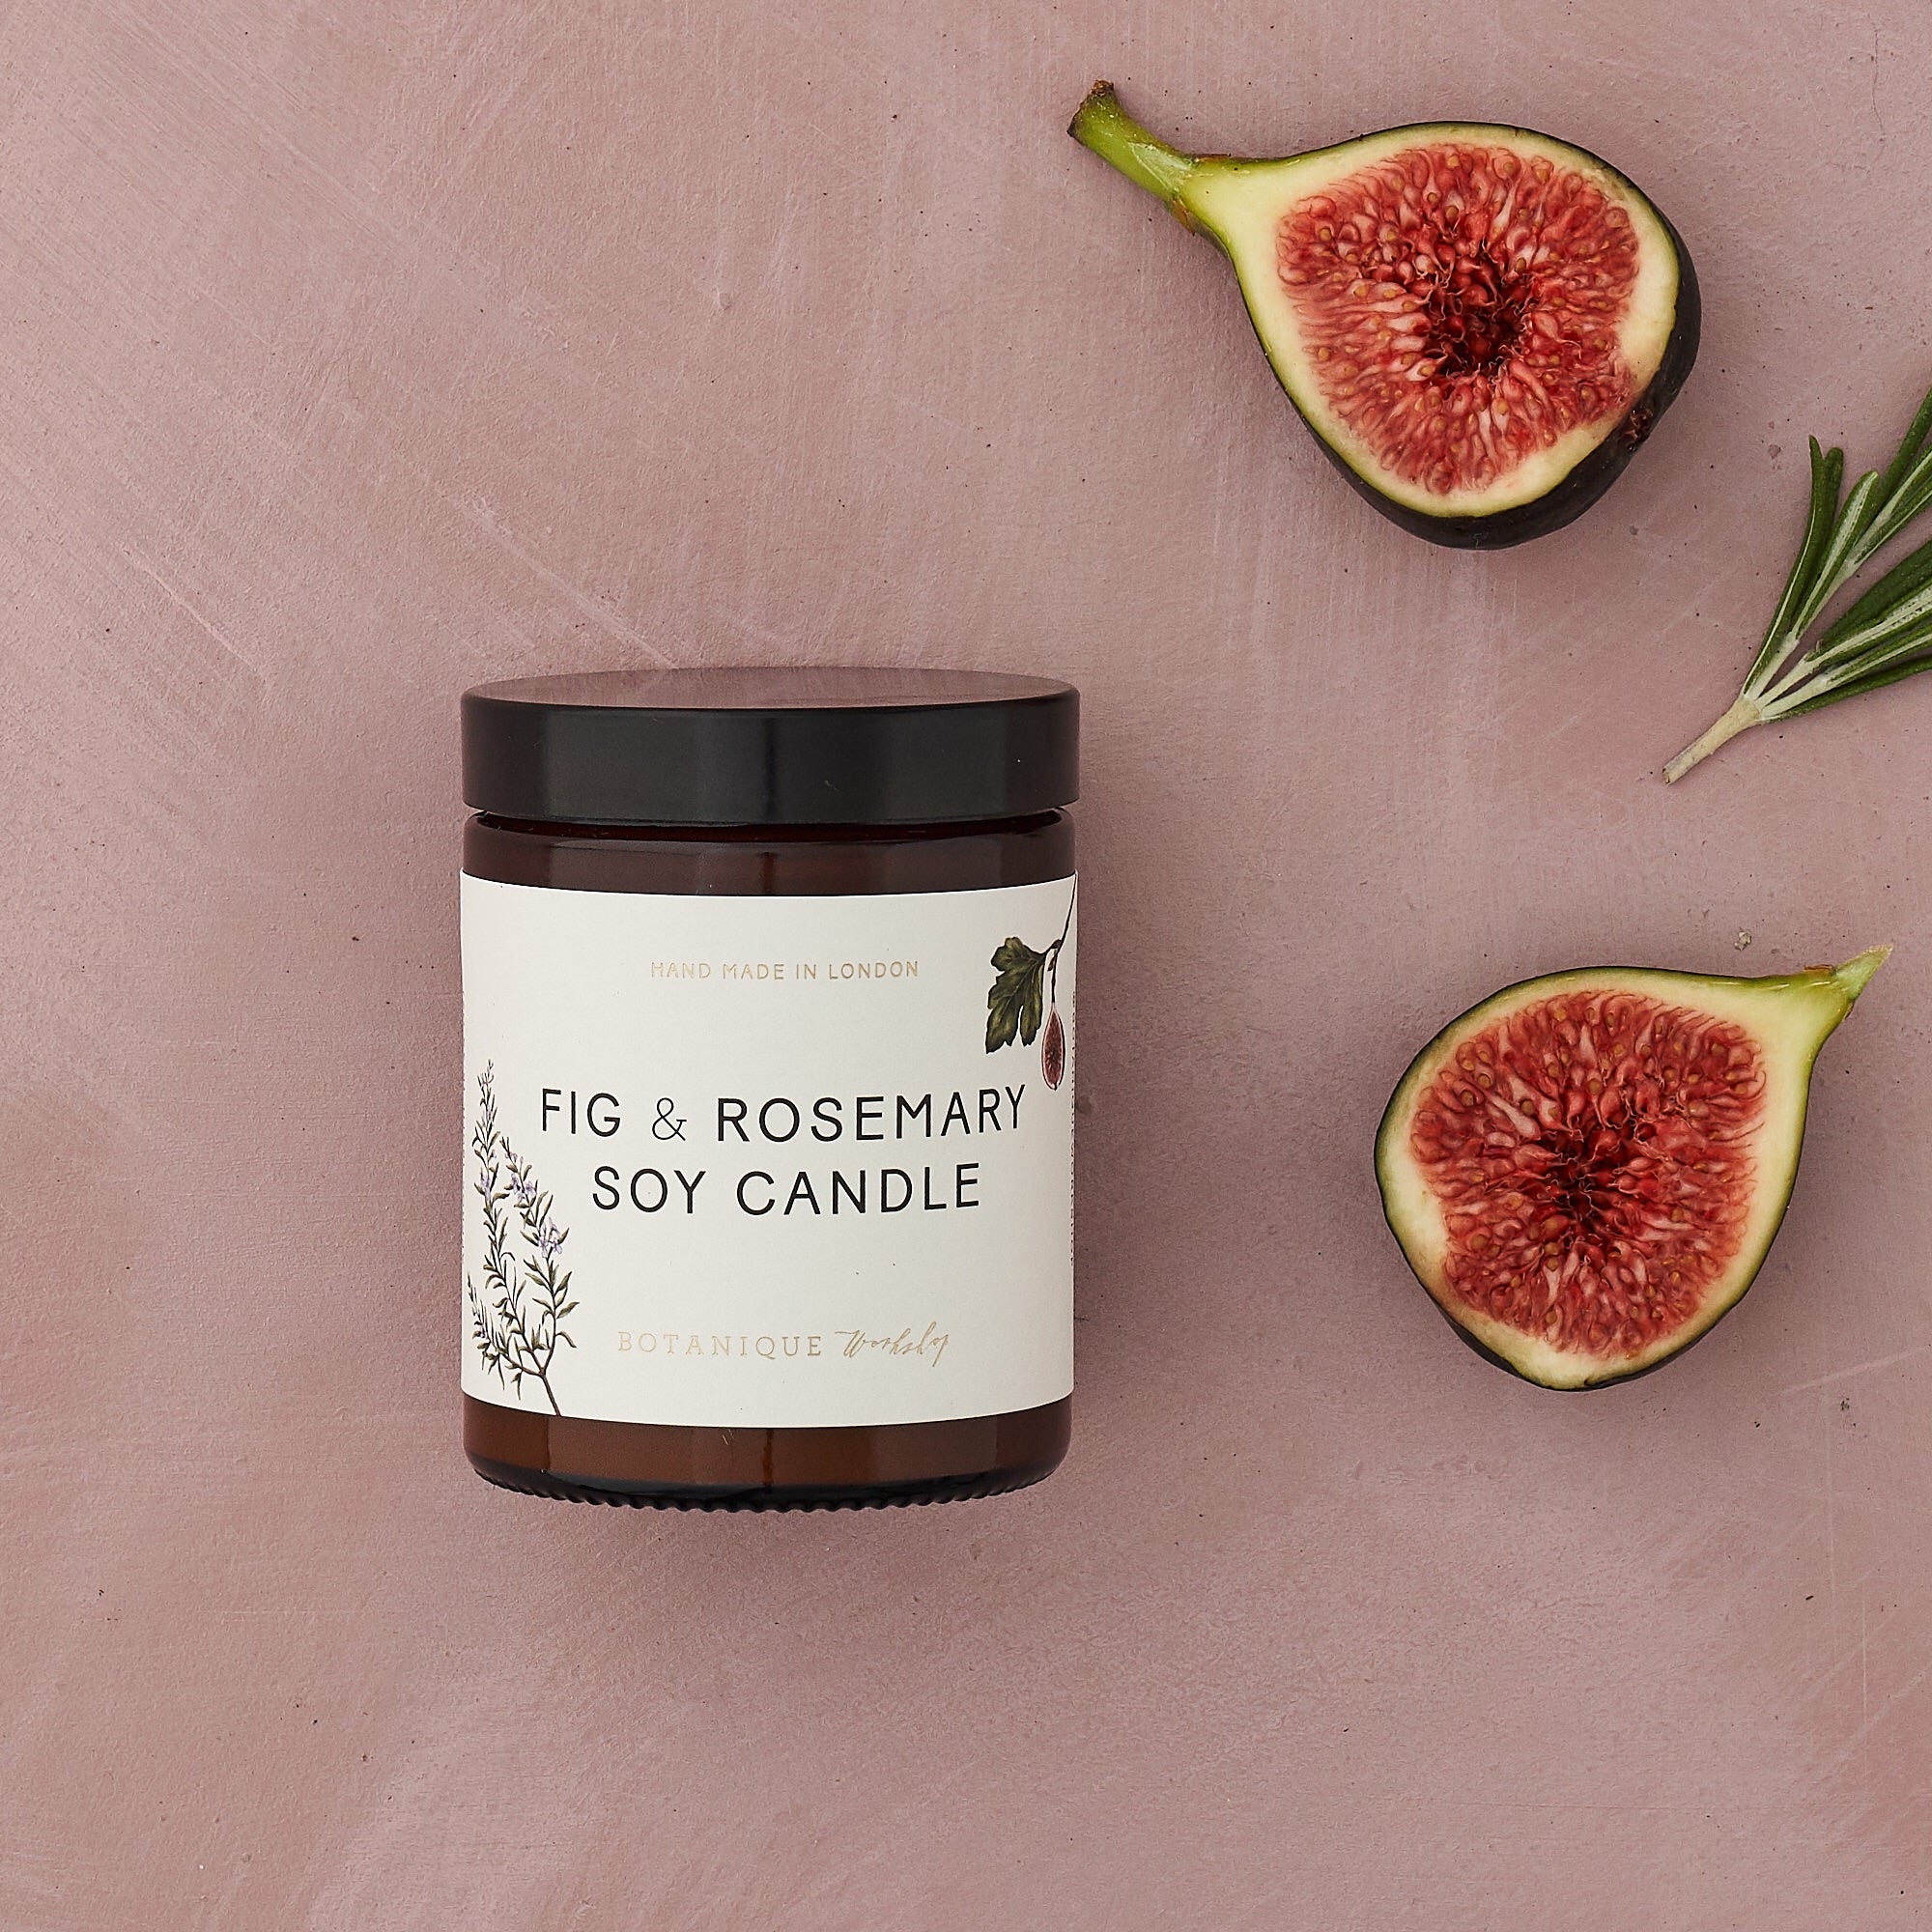 Hand-poured Fig & Rosemary scented Soy Candles